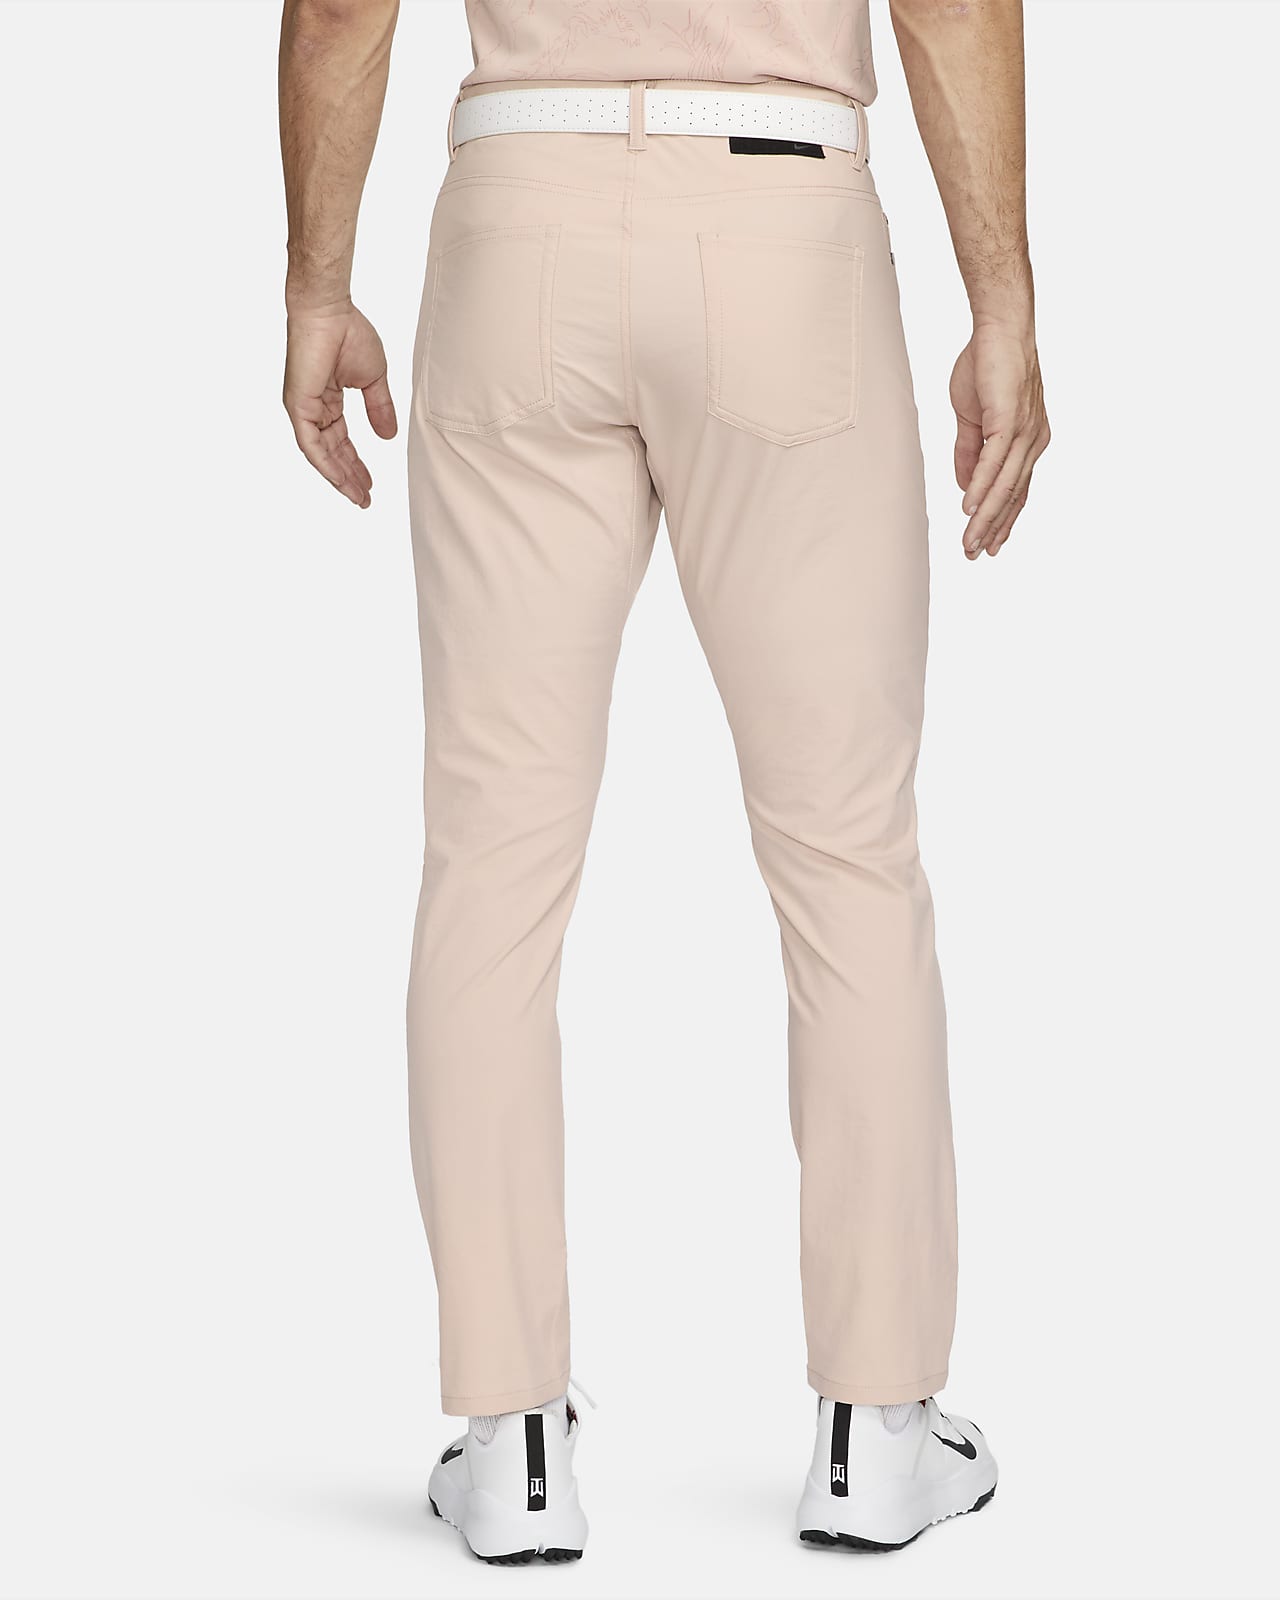 Player Fit 5Pocket Golf Pant  Dunning